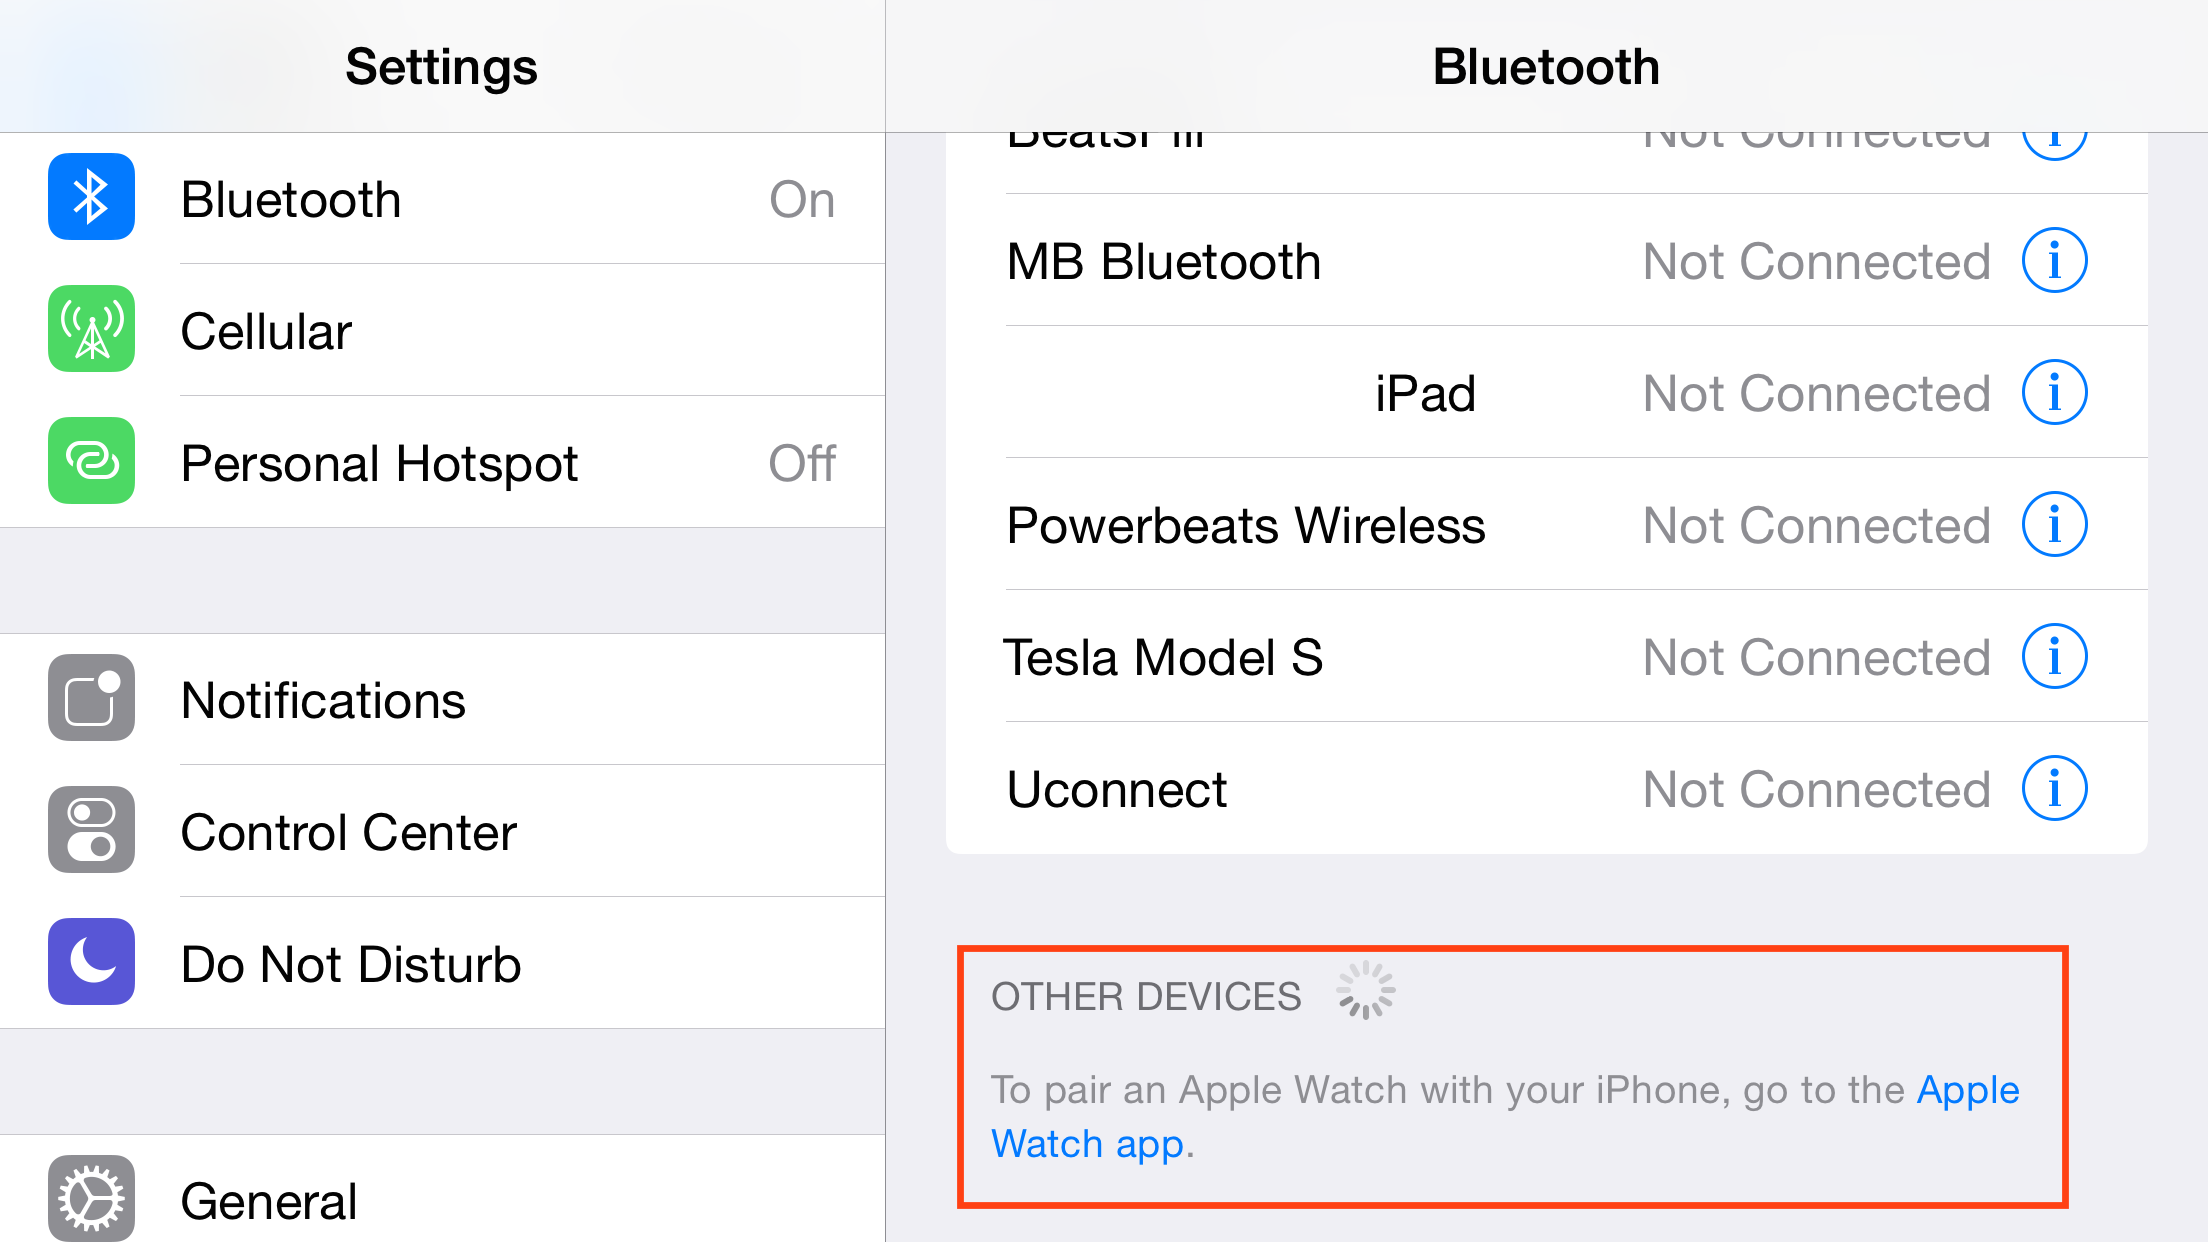 iOS 8.2 Beta Adds Apple Watch Support - Prime Inspiration